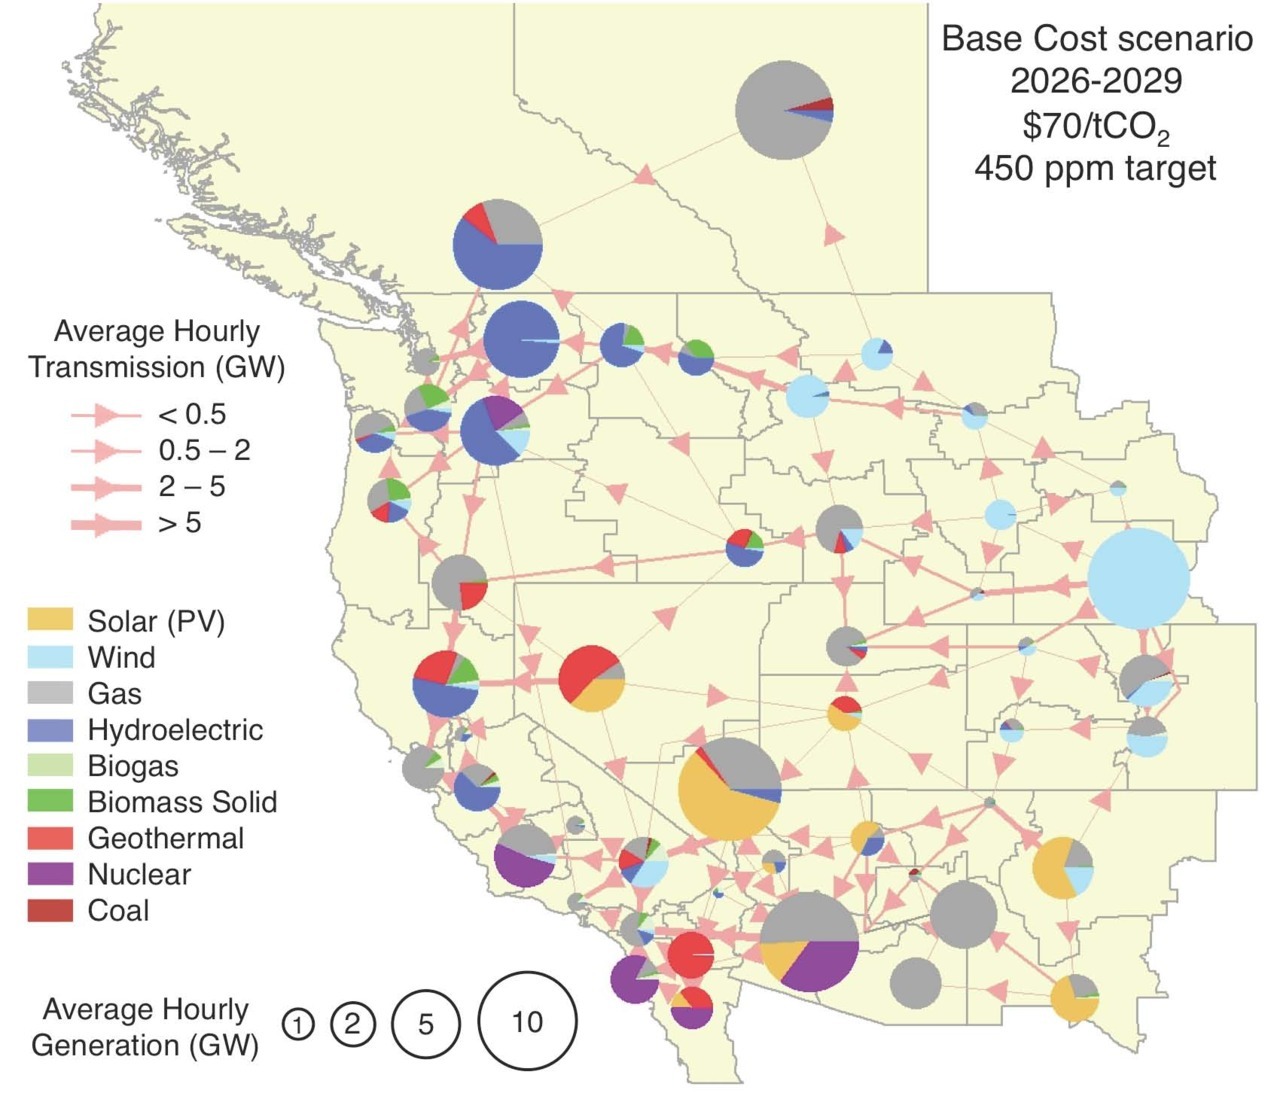 “To reach a low-cost, low-carbon electricity system in the West, UC Berkeley energy researchers propose this combo of power sources as one possible solution. A carbon tax (placing CO2 at about $70/ton) could help the West reach a goal of 54 percent...